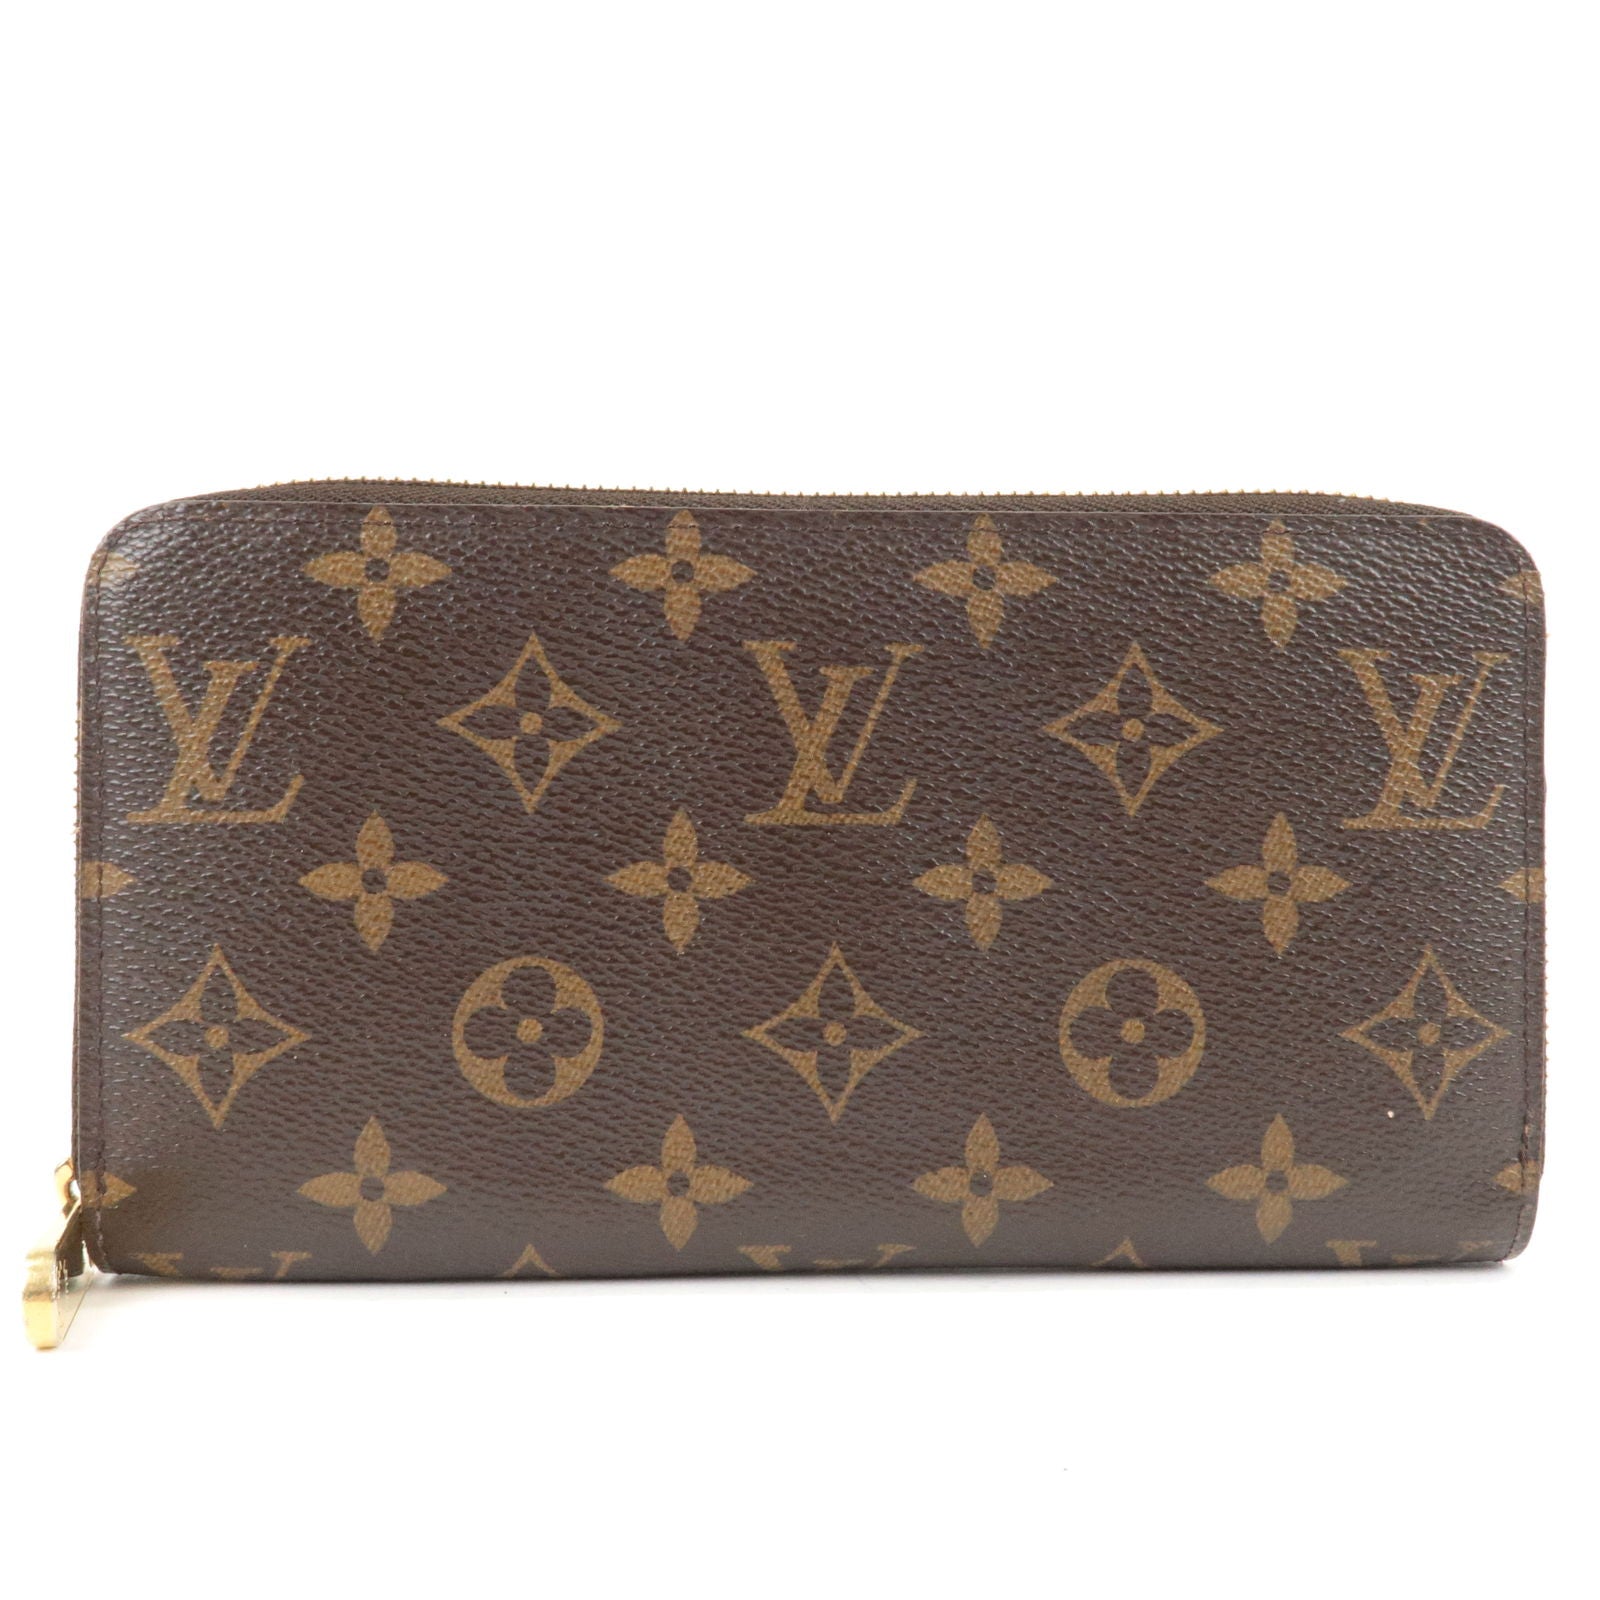 Old Louis Vuitton Wallet Styles For Menthol